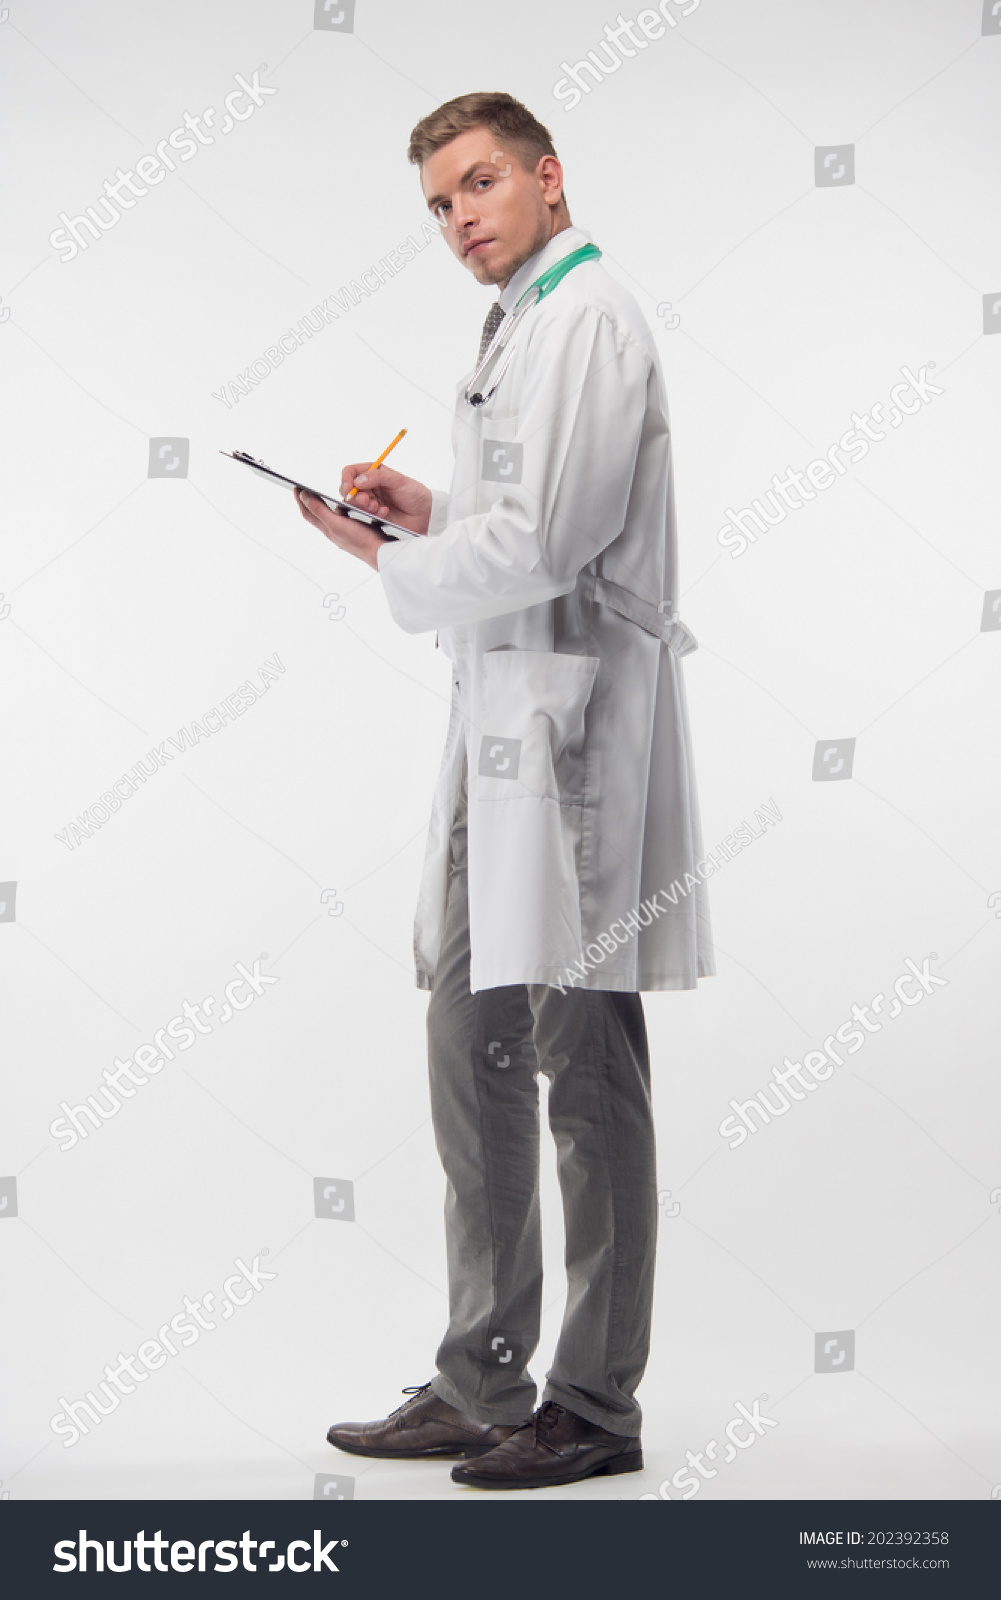 Full Length Portrait Of Very Attractive Doctor Wearing White Coat